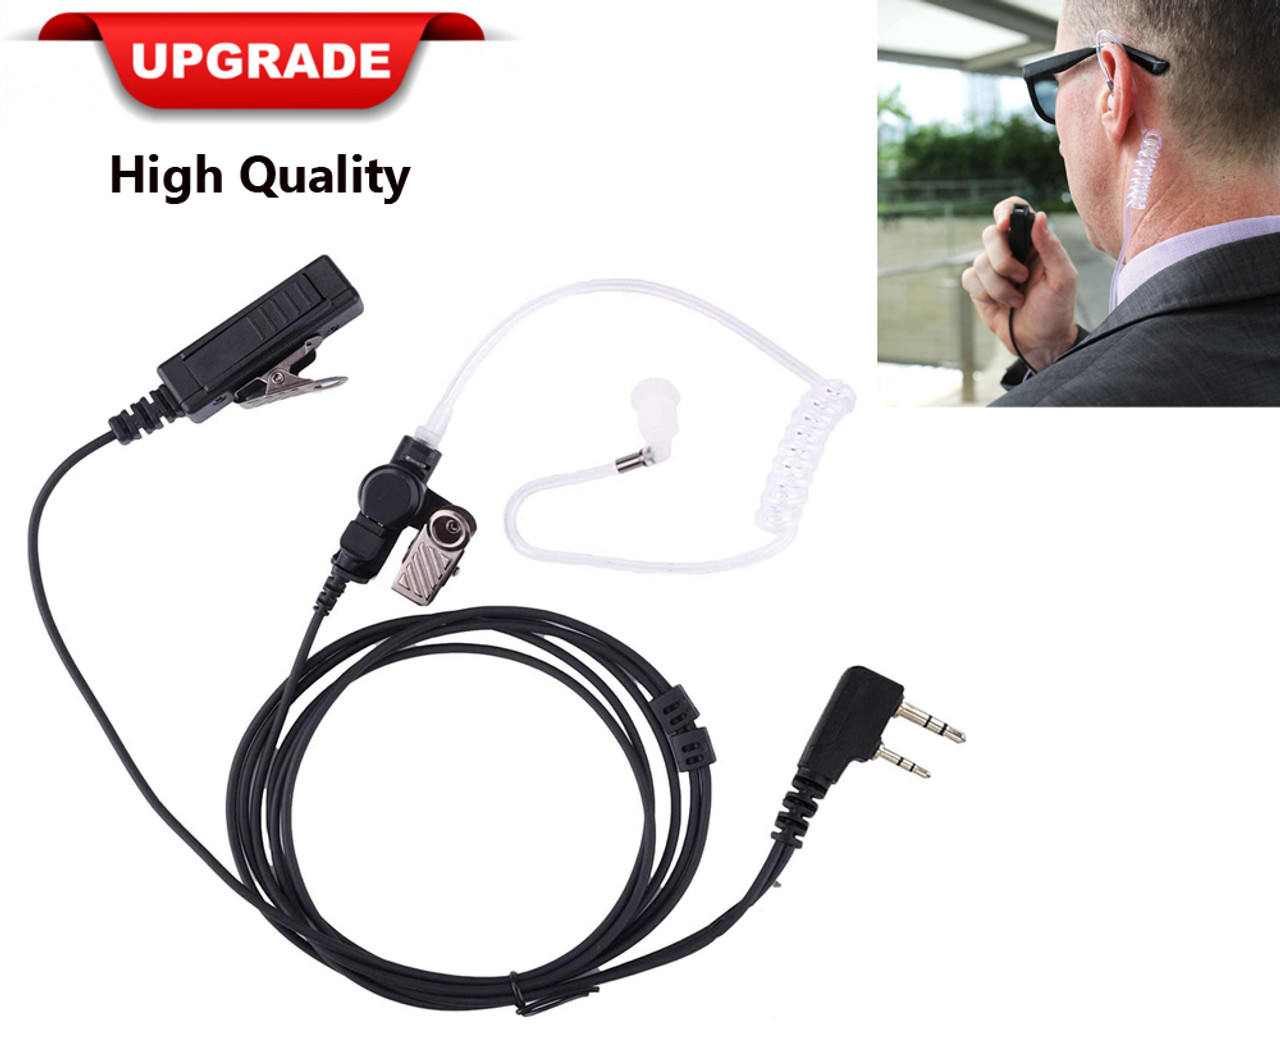 Covert Air Acoustic Tube Walkie Talkie Earpiece Headset with Mic Compatible  with Pin Kenwood BaoFeng Two Way Radio| BaoFeng Radio UK